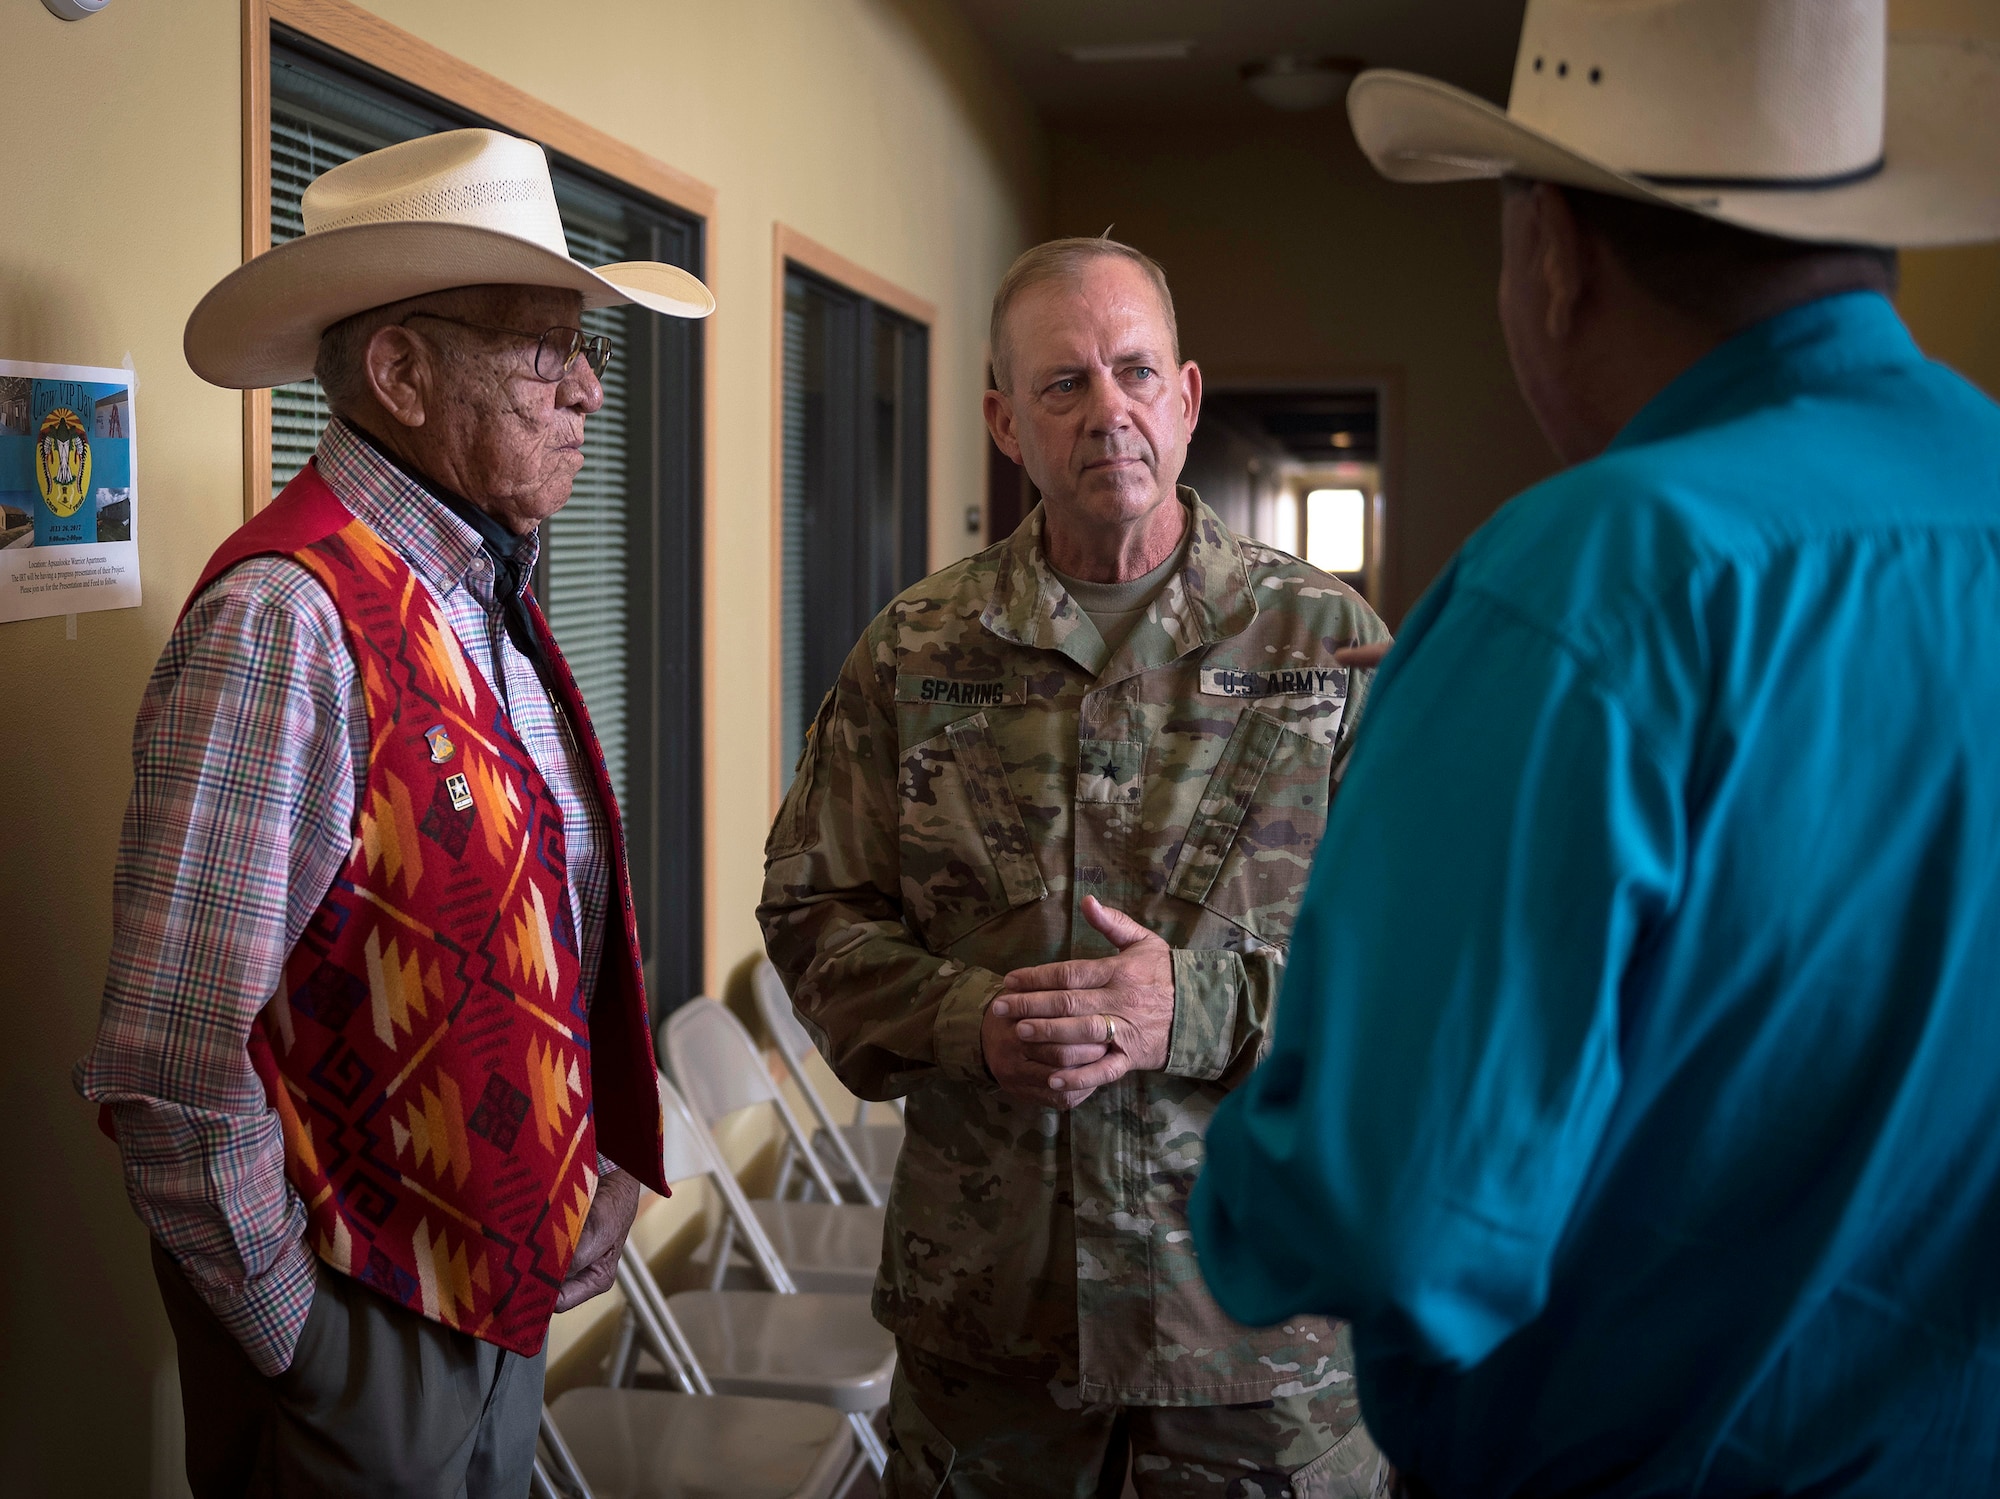 U.S. Army Brig. Gen. Robert Sparing, the assistant adjutant general-Army for the Montana National Guard, speaks to tribal leaders Newton Old Crow, left, and Oliver Half before the Innovative Readiness Training opening ceremony in Crow Agency, Mont., July 26, 2017. The IRT program is a civil-military relations cooperative that provided hands-on training for military members who built and renovated homes for Crow military veterans. (U.S. Air National Guard photo by Tech. Sgt. Lealan Buehrer)